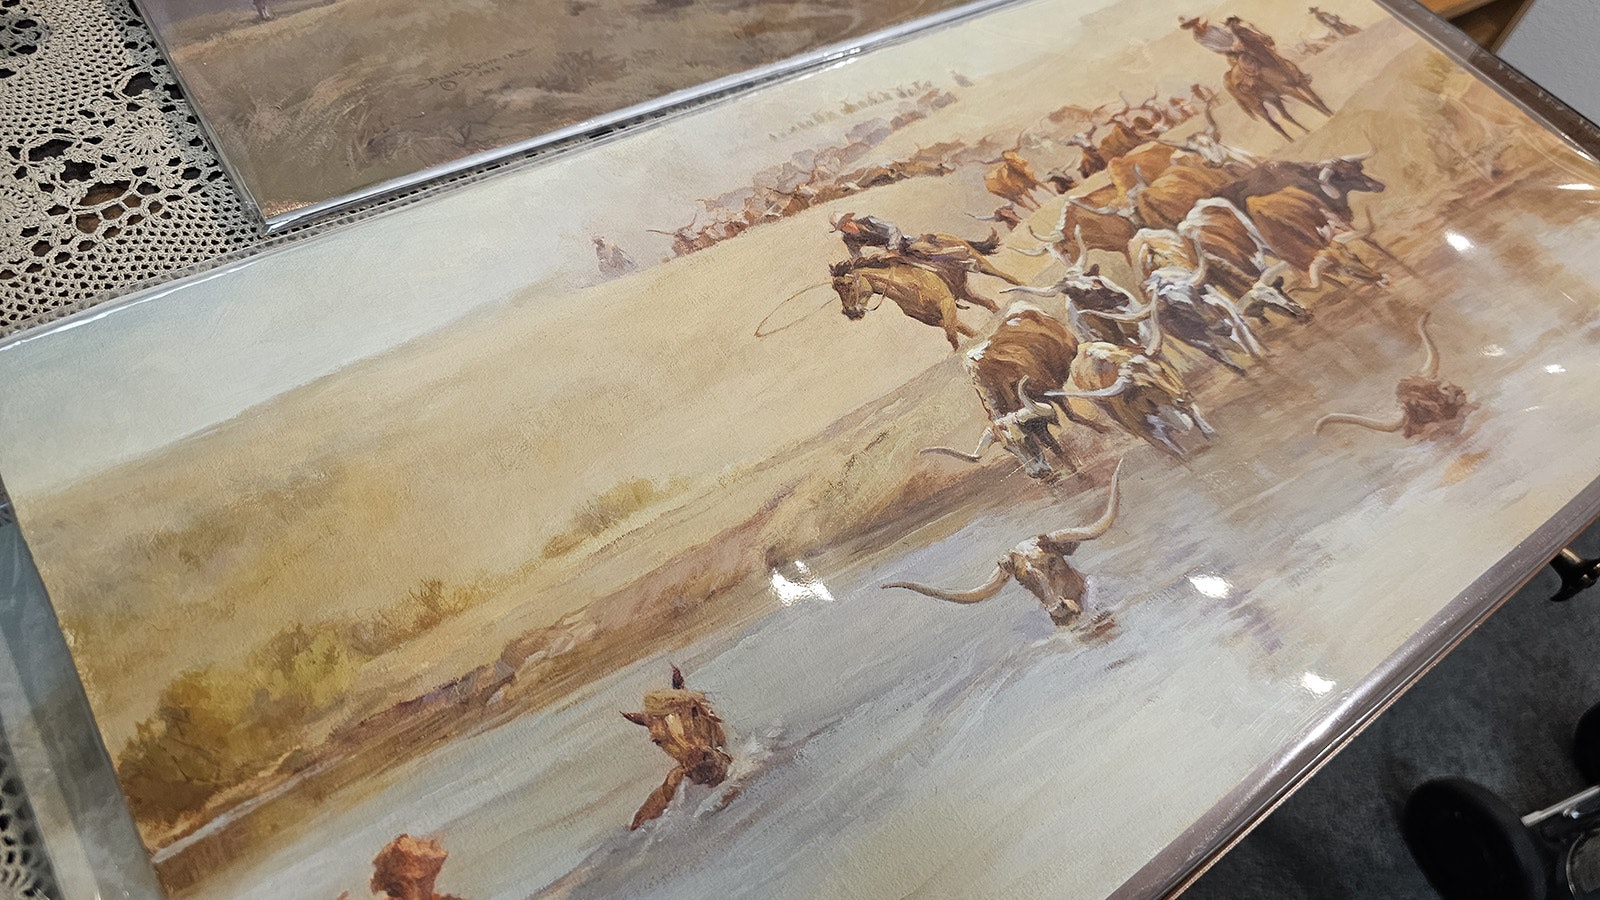 Many a cowboy and many a steer drowned crossing the river on the Texas Trail, which traveled right through Goshen County. The painting is one of five prepared by Barbara Schaffner of Wheatland.